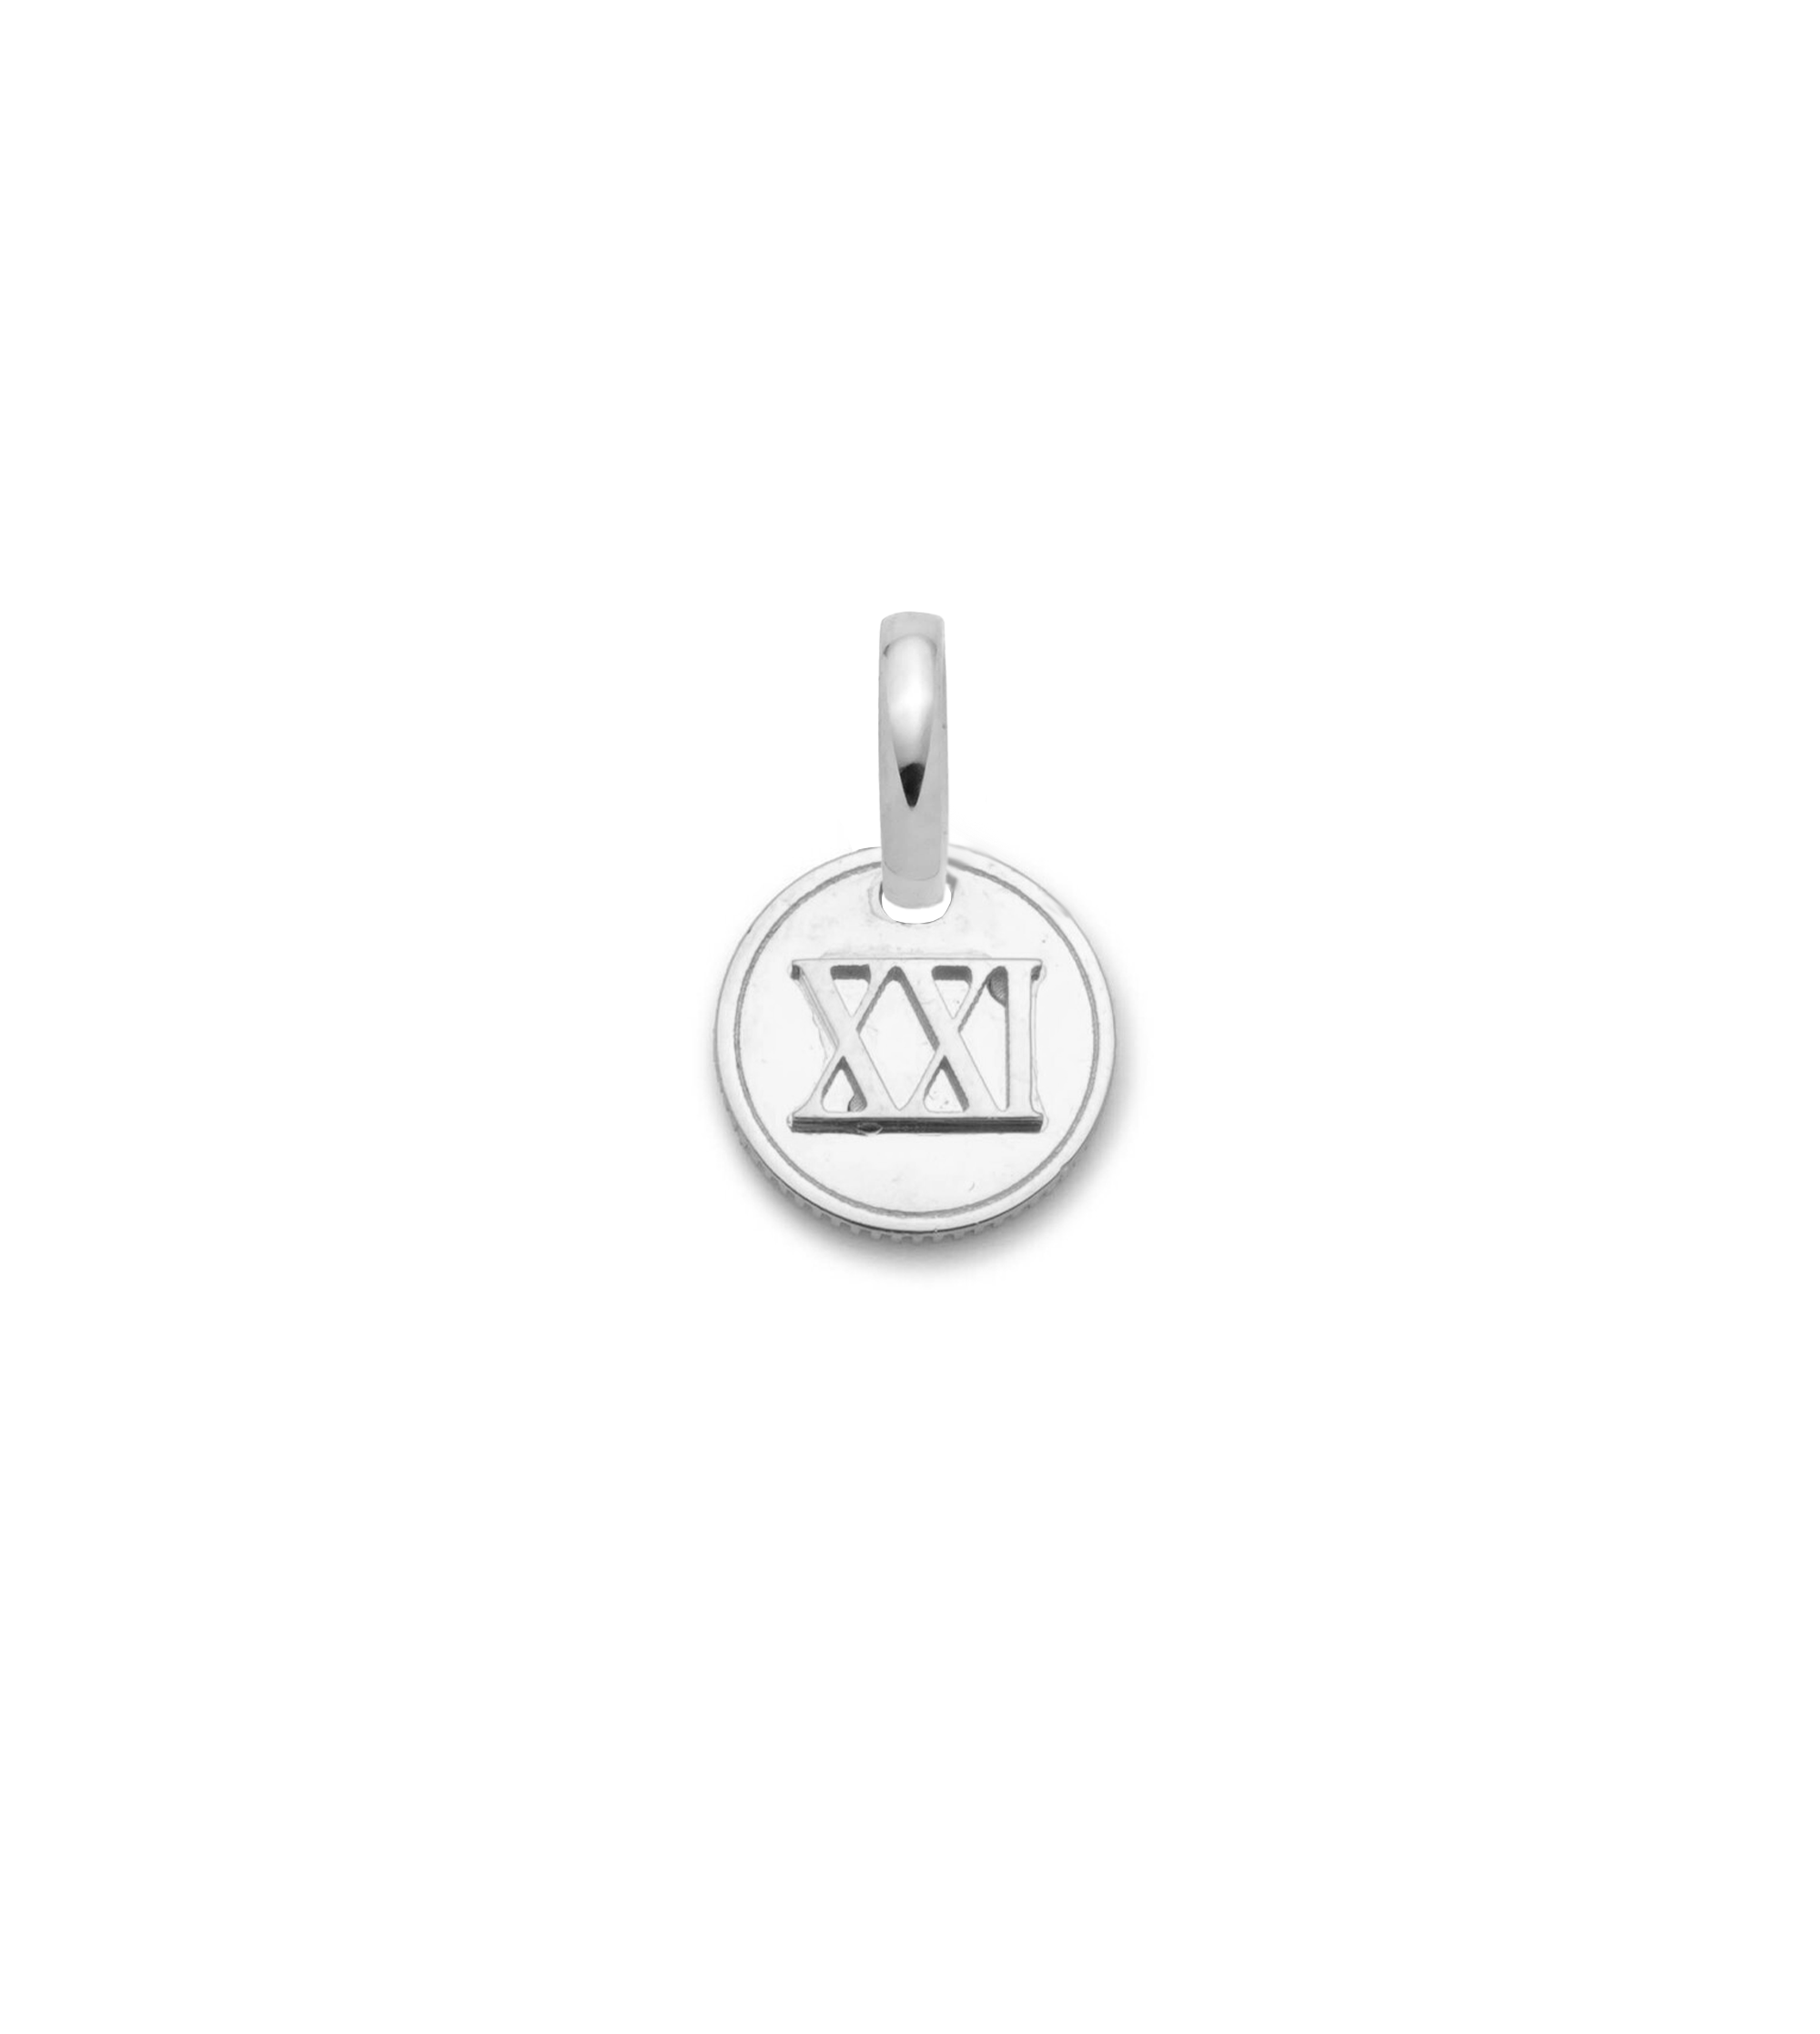 Custom Roman Numeral : Miniature Coin with Oval Push Gate